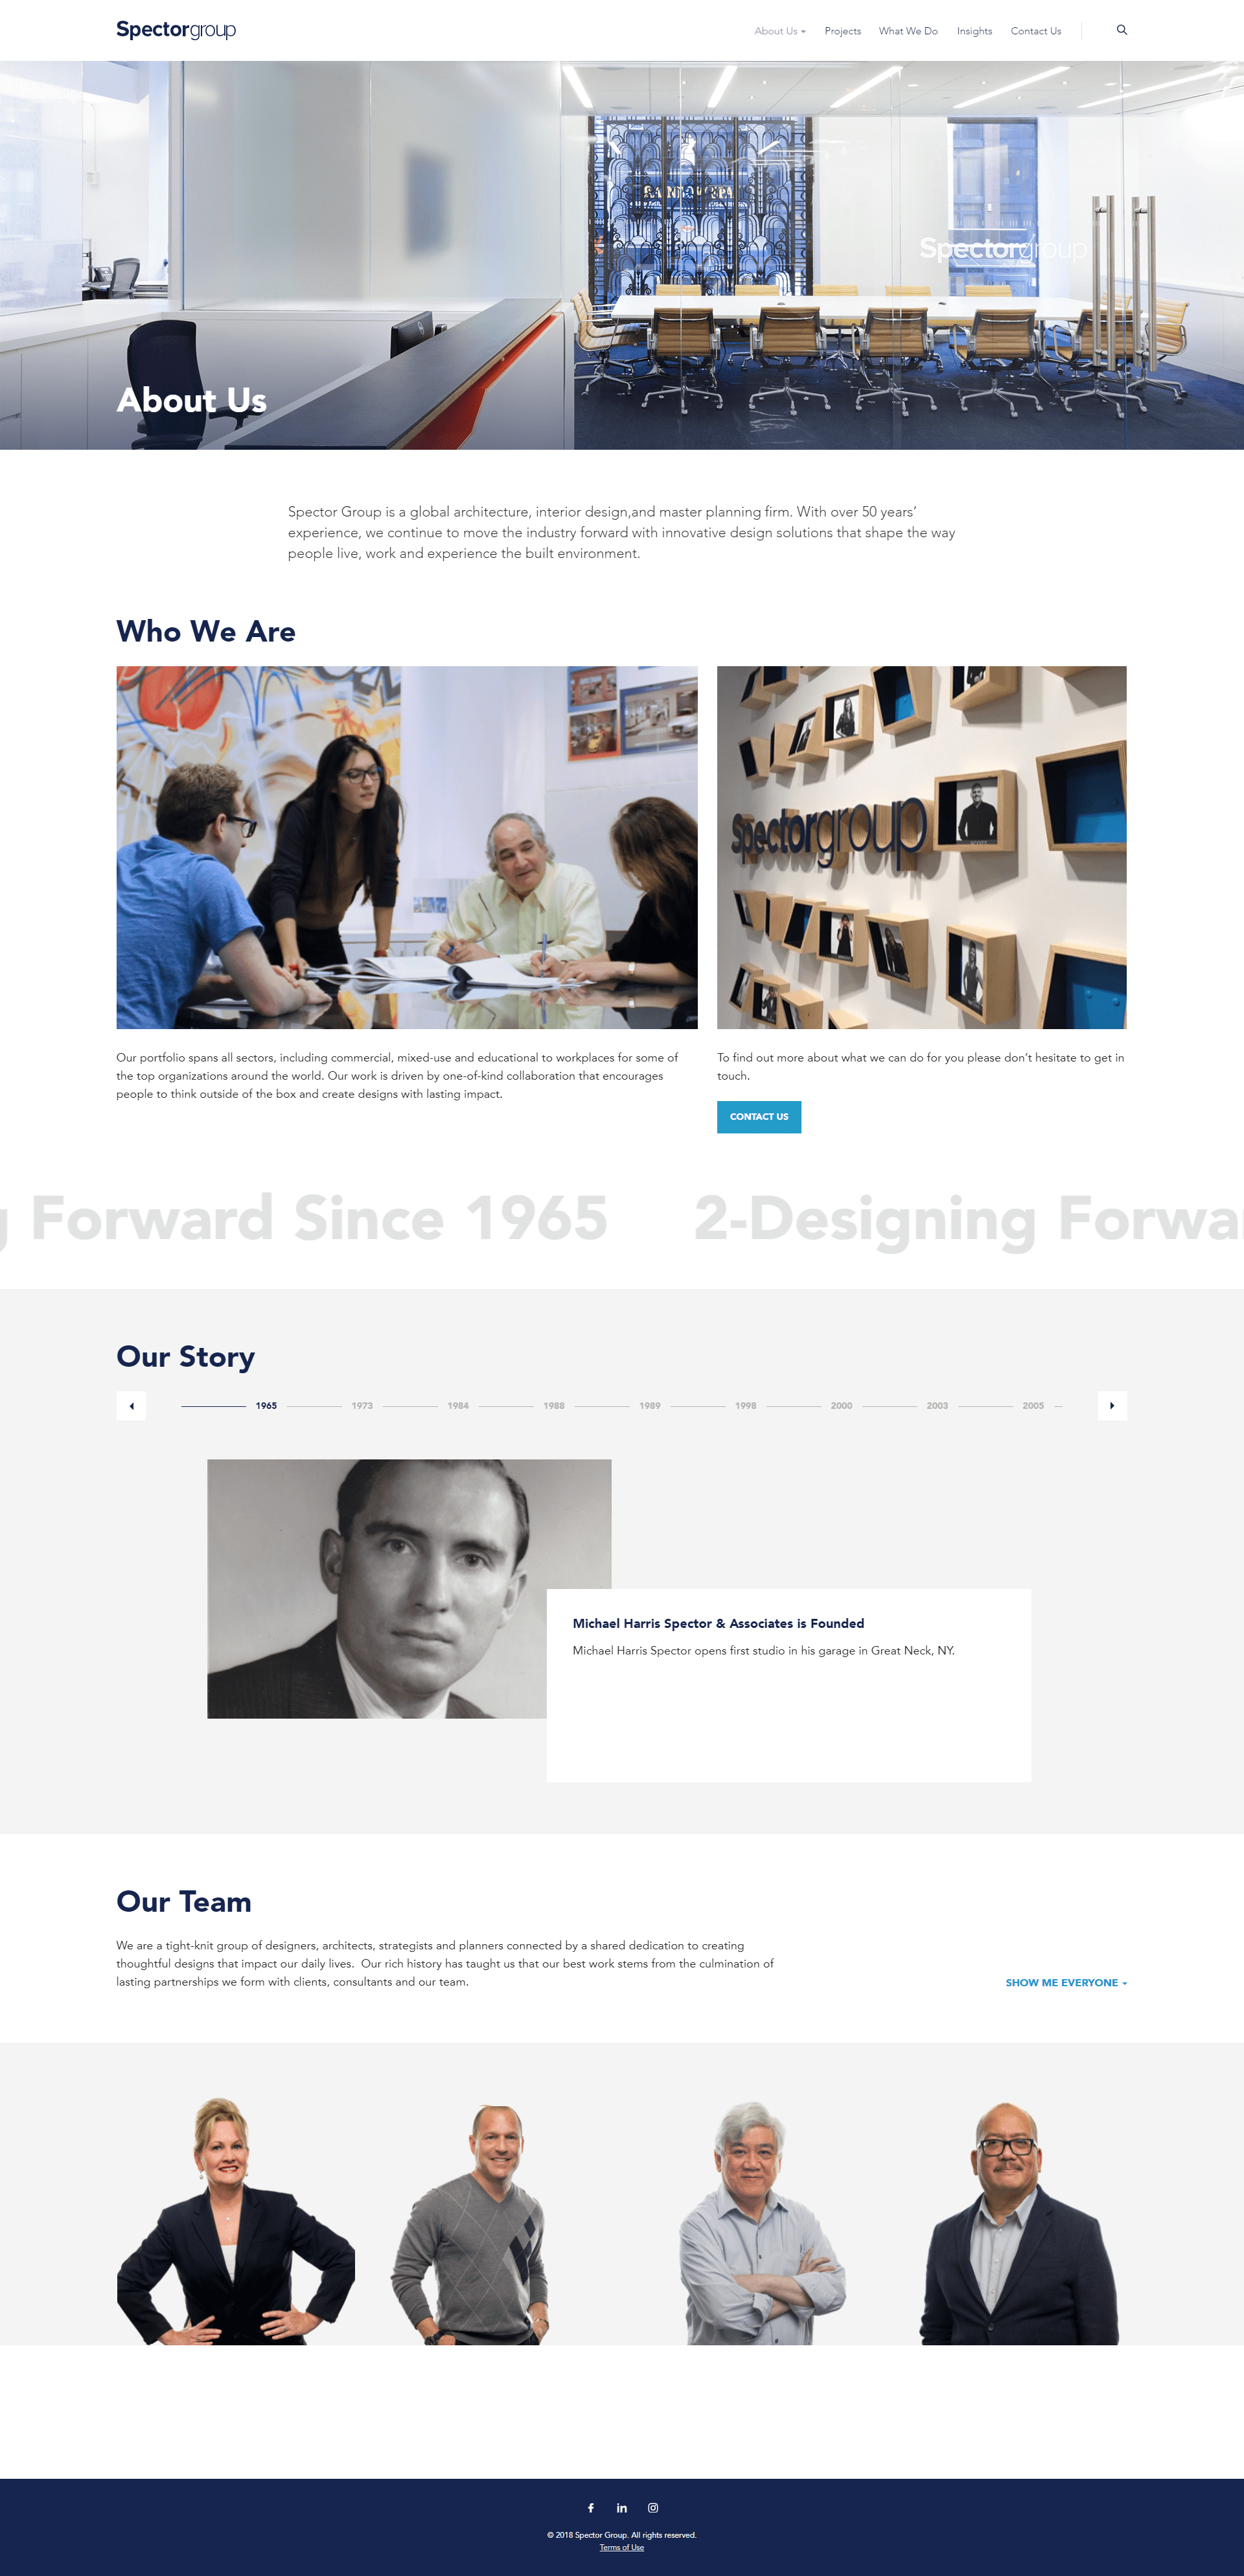 Spector Group Home Page Design & Development